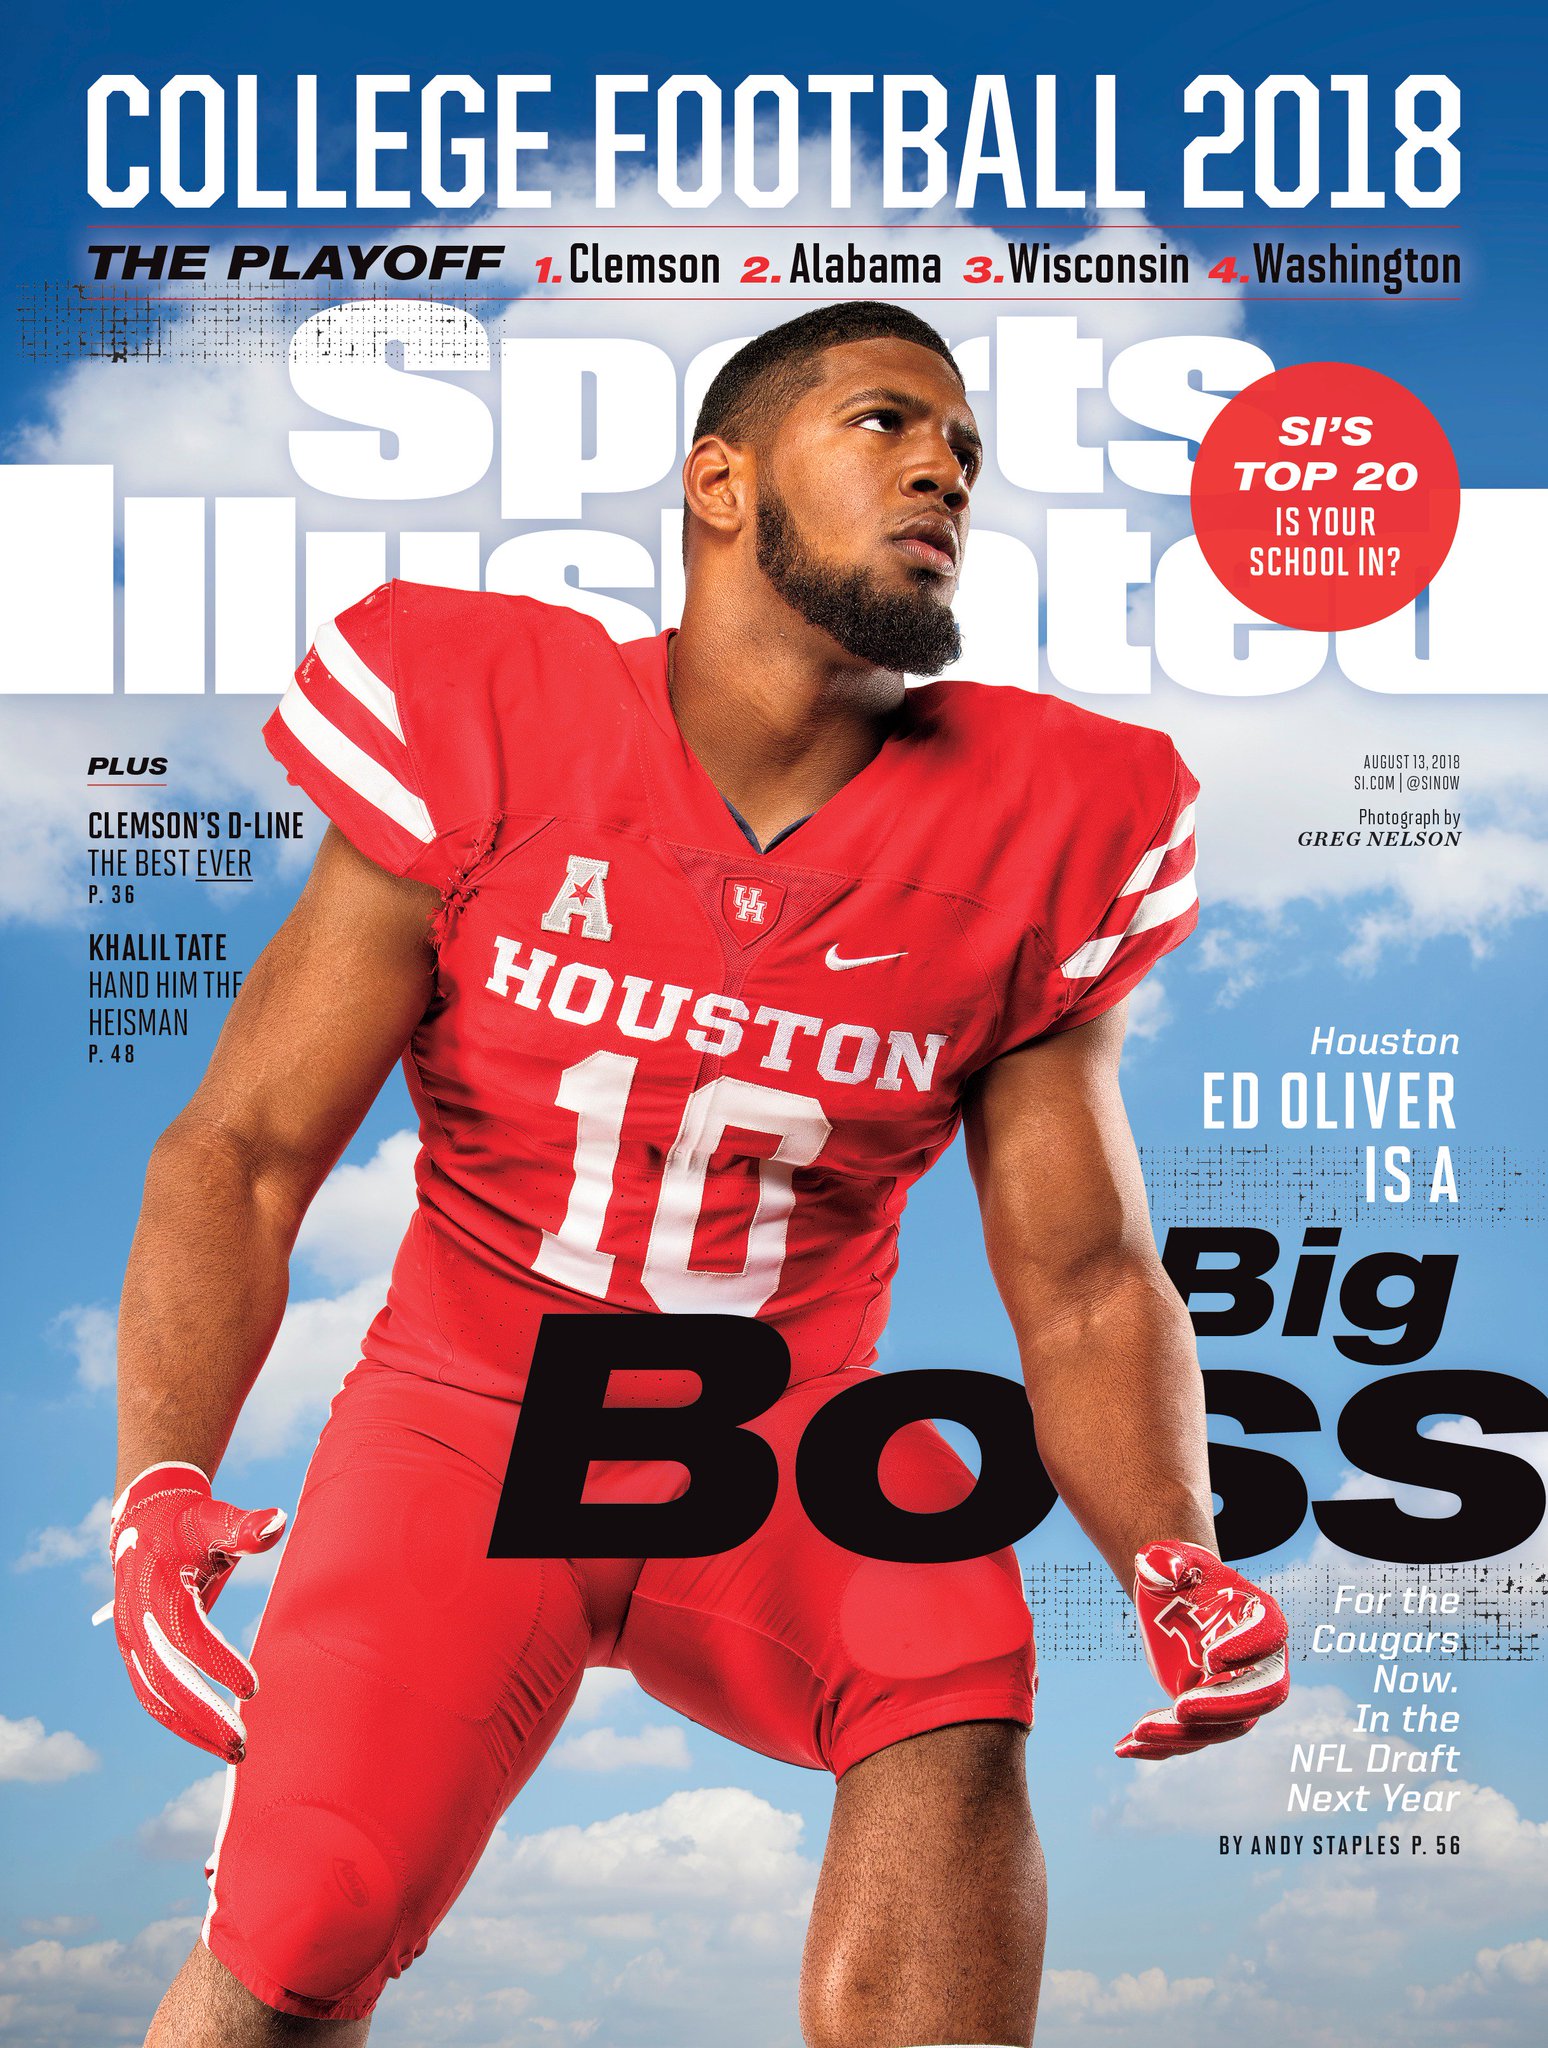 Sports Illustrated on Twitter: "Ed Oliver is the best ...